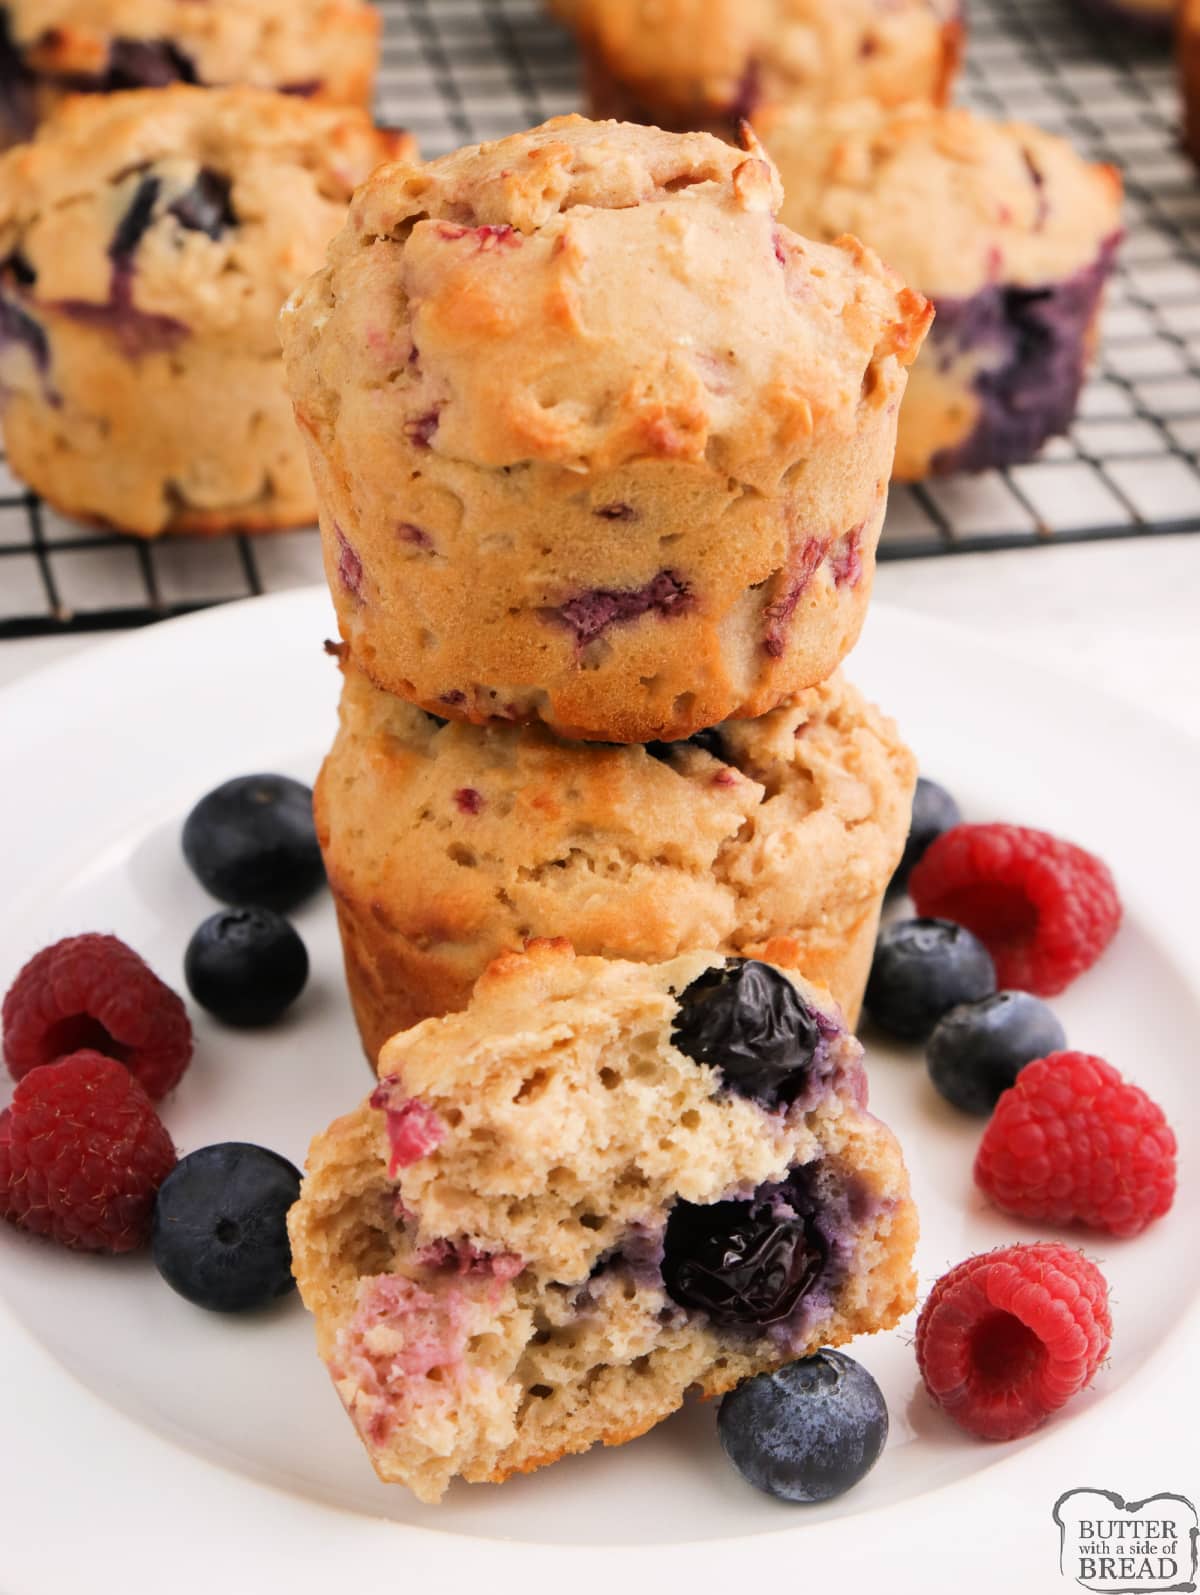 Muffins with 12 grams of protein